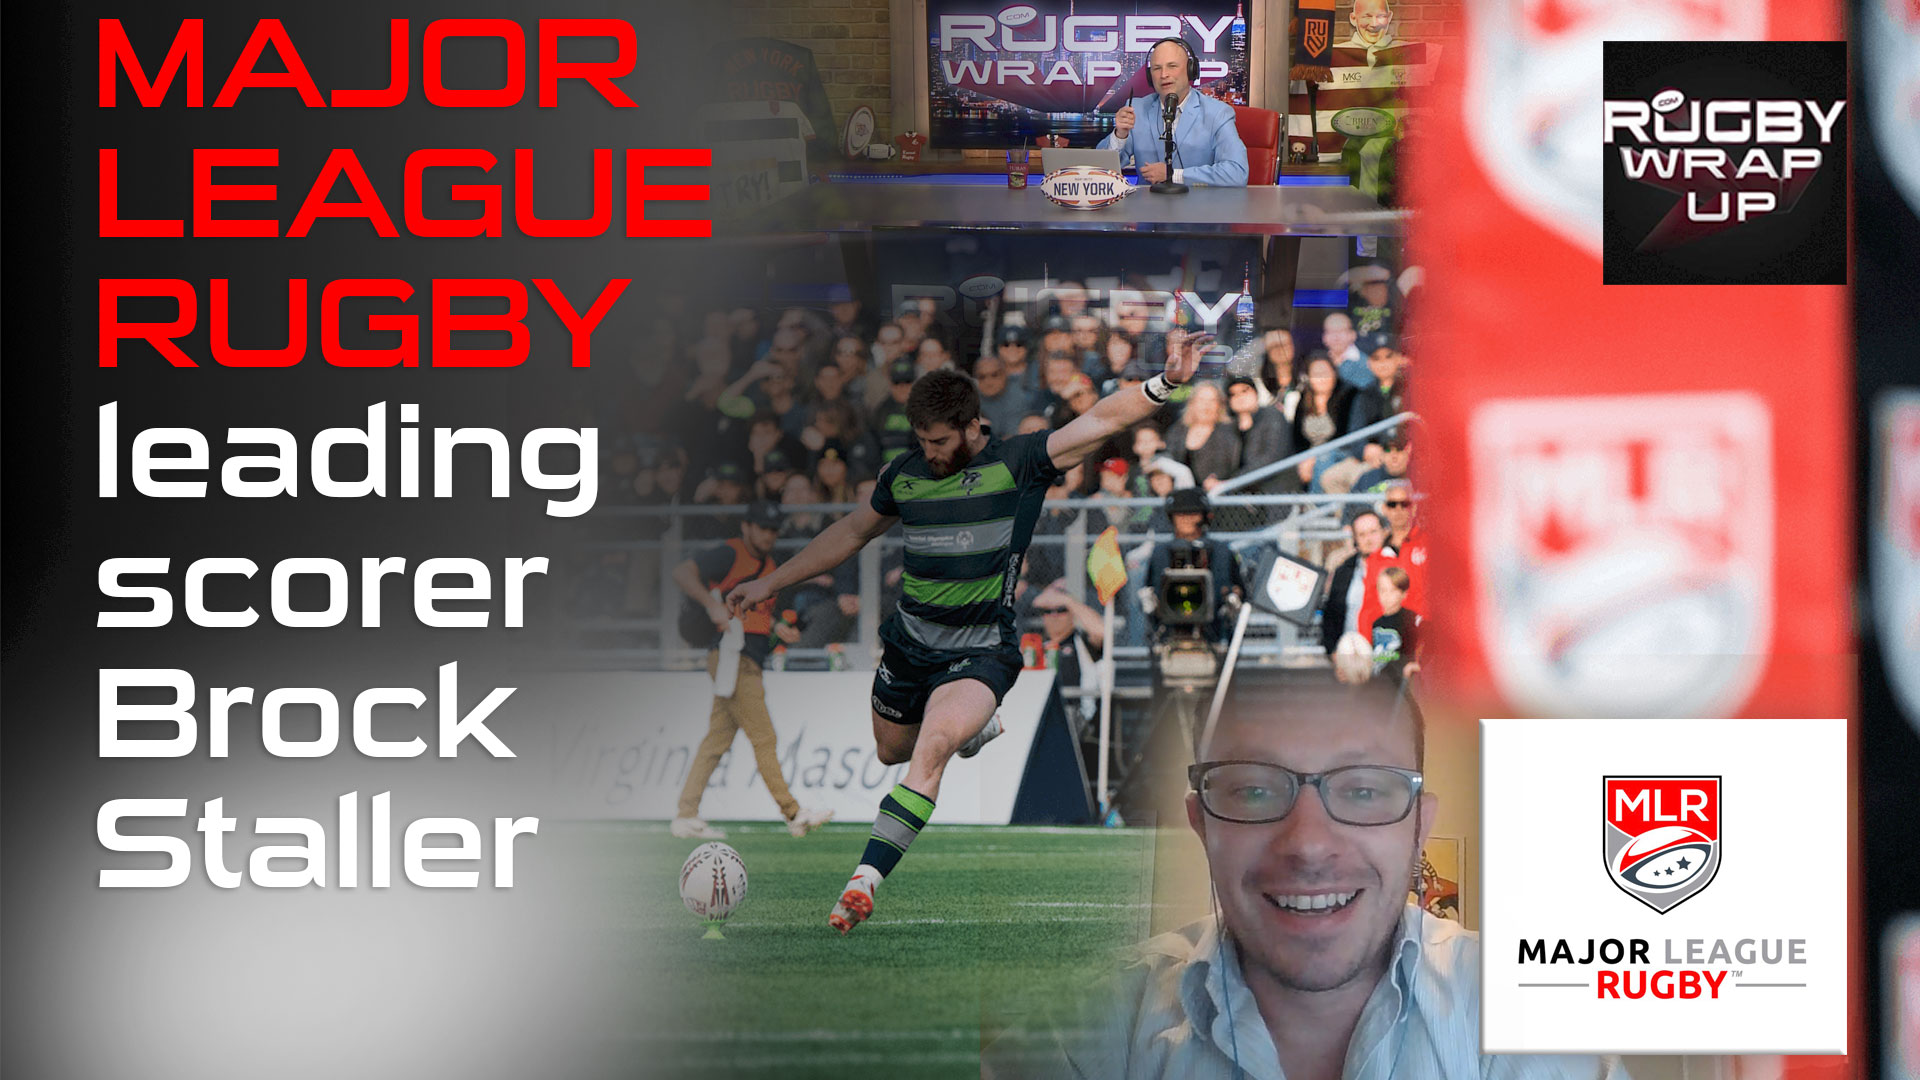 Major League Rugby: Seattle Seawolves Star Brock Staller, Bryan Ray of Americas Rugby News, Rugby_Wrap_Up